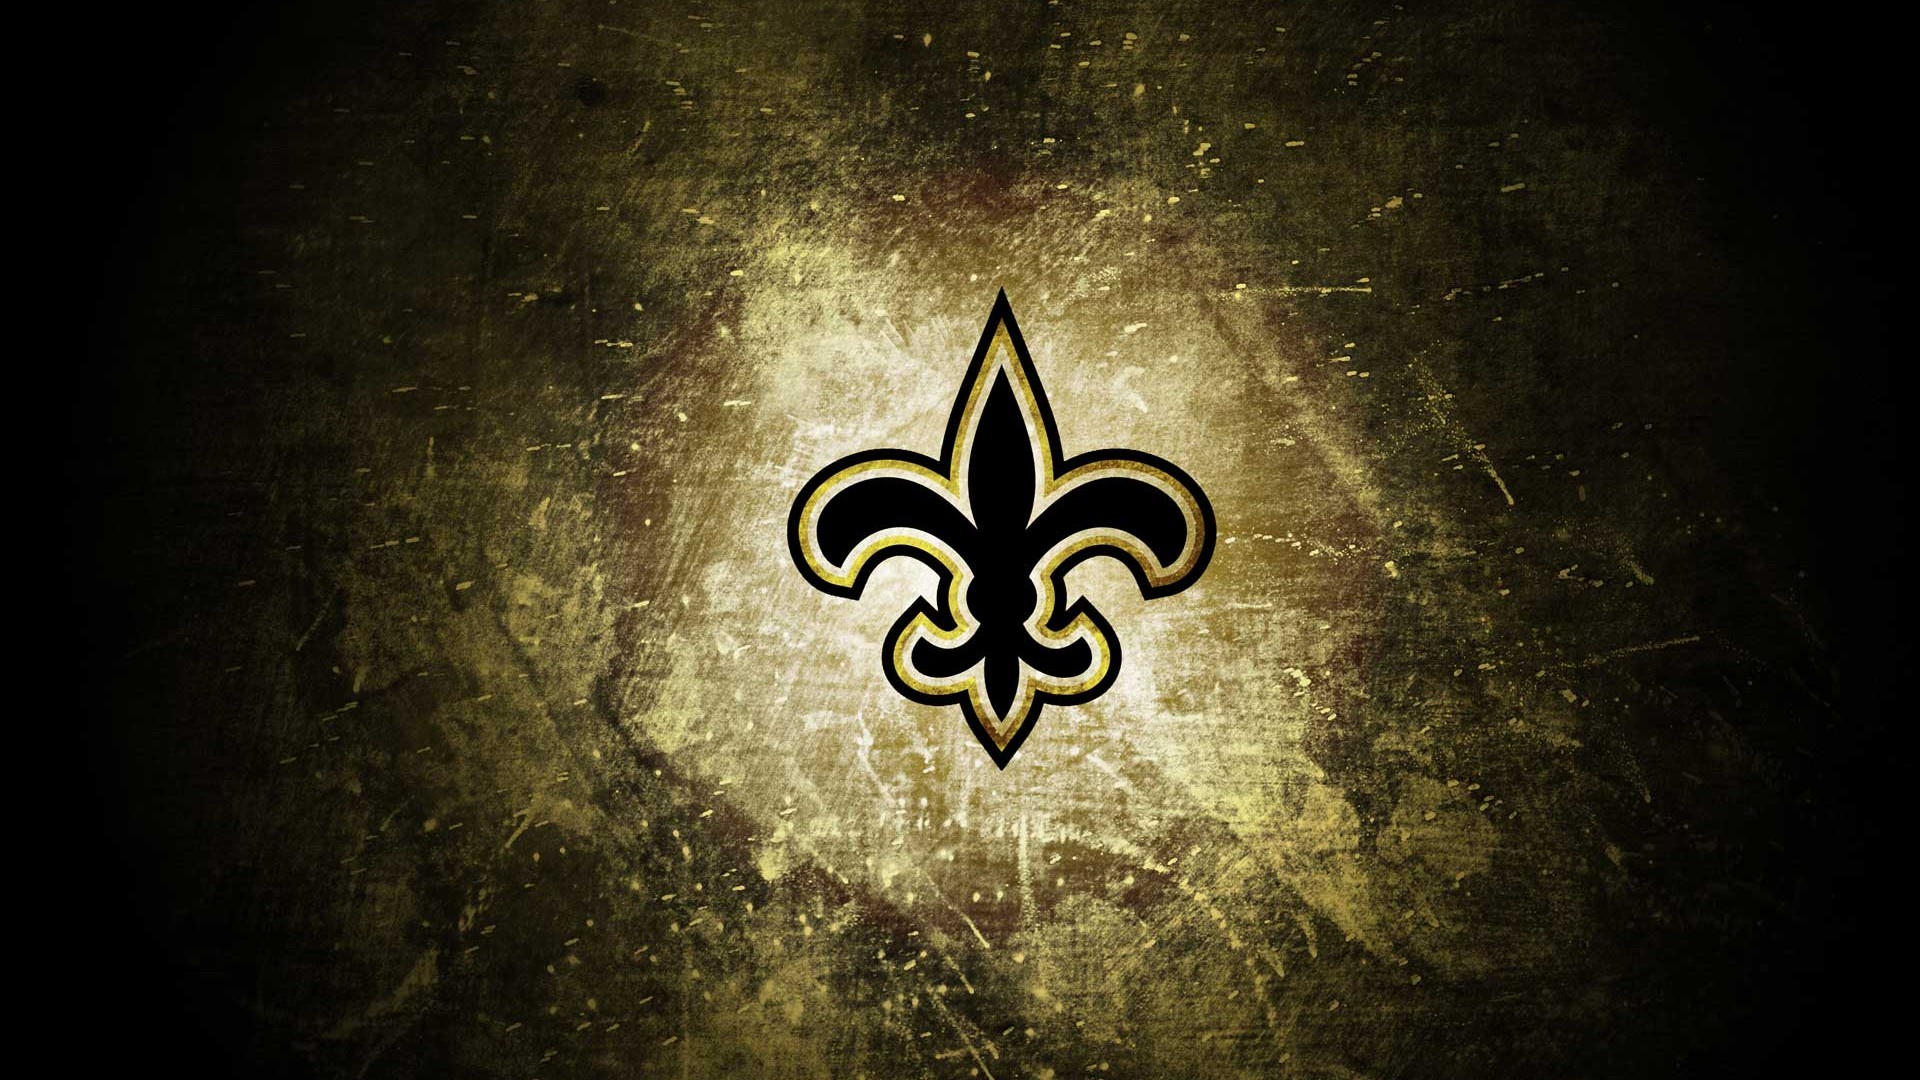 HD New Orleans Saints Wallpapers with resolution 1920x1080 pixel. You can make this wallpaper for your Mac or Windows Desktop Background, iPhone, Android or Tablet and another Smartphone device